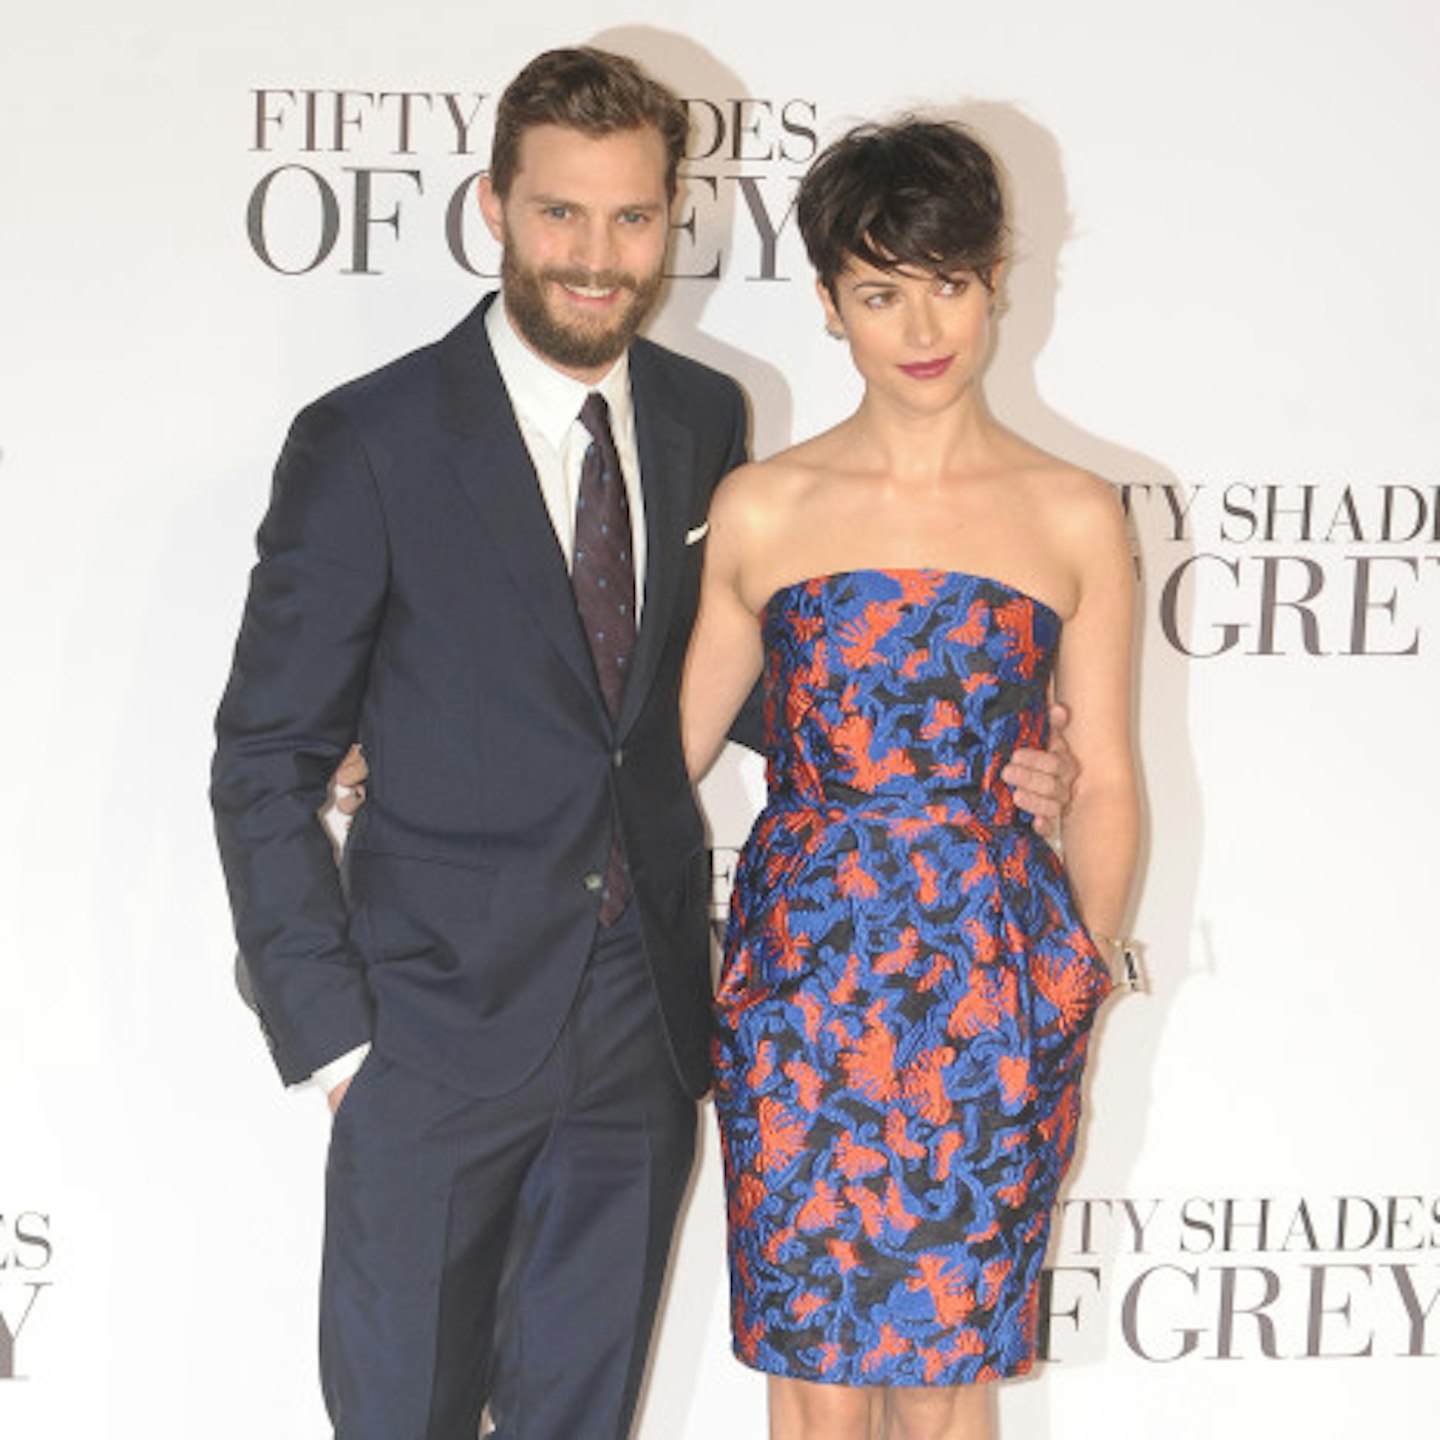 Jamie insisted Amelia is 'totally supportive' of him starring in Fifty Shades